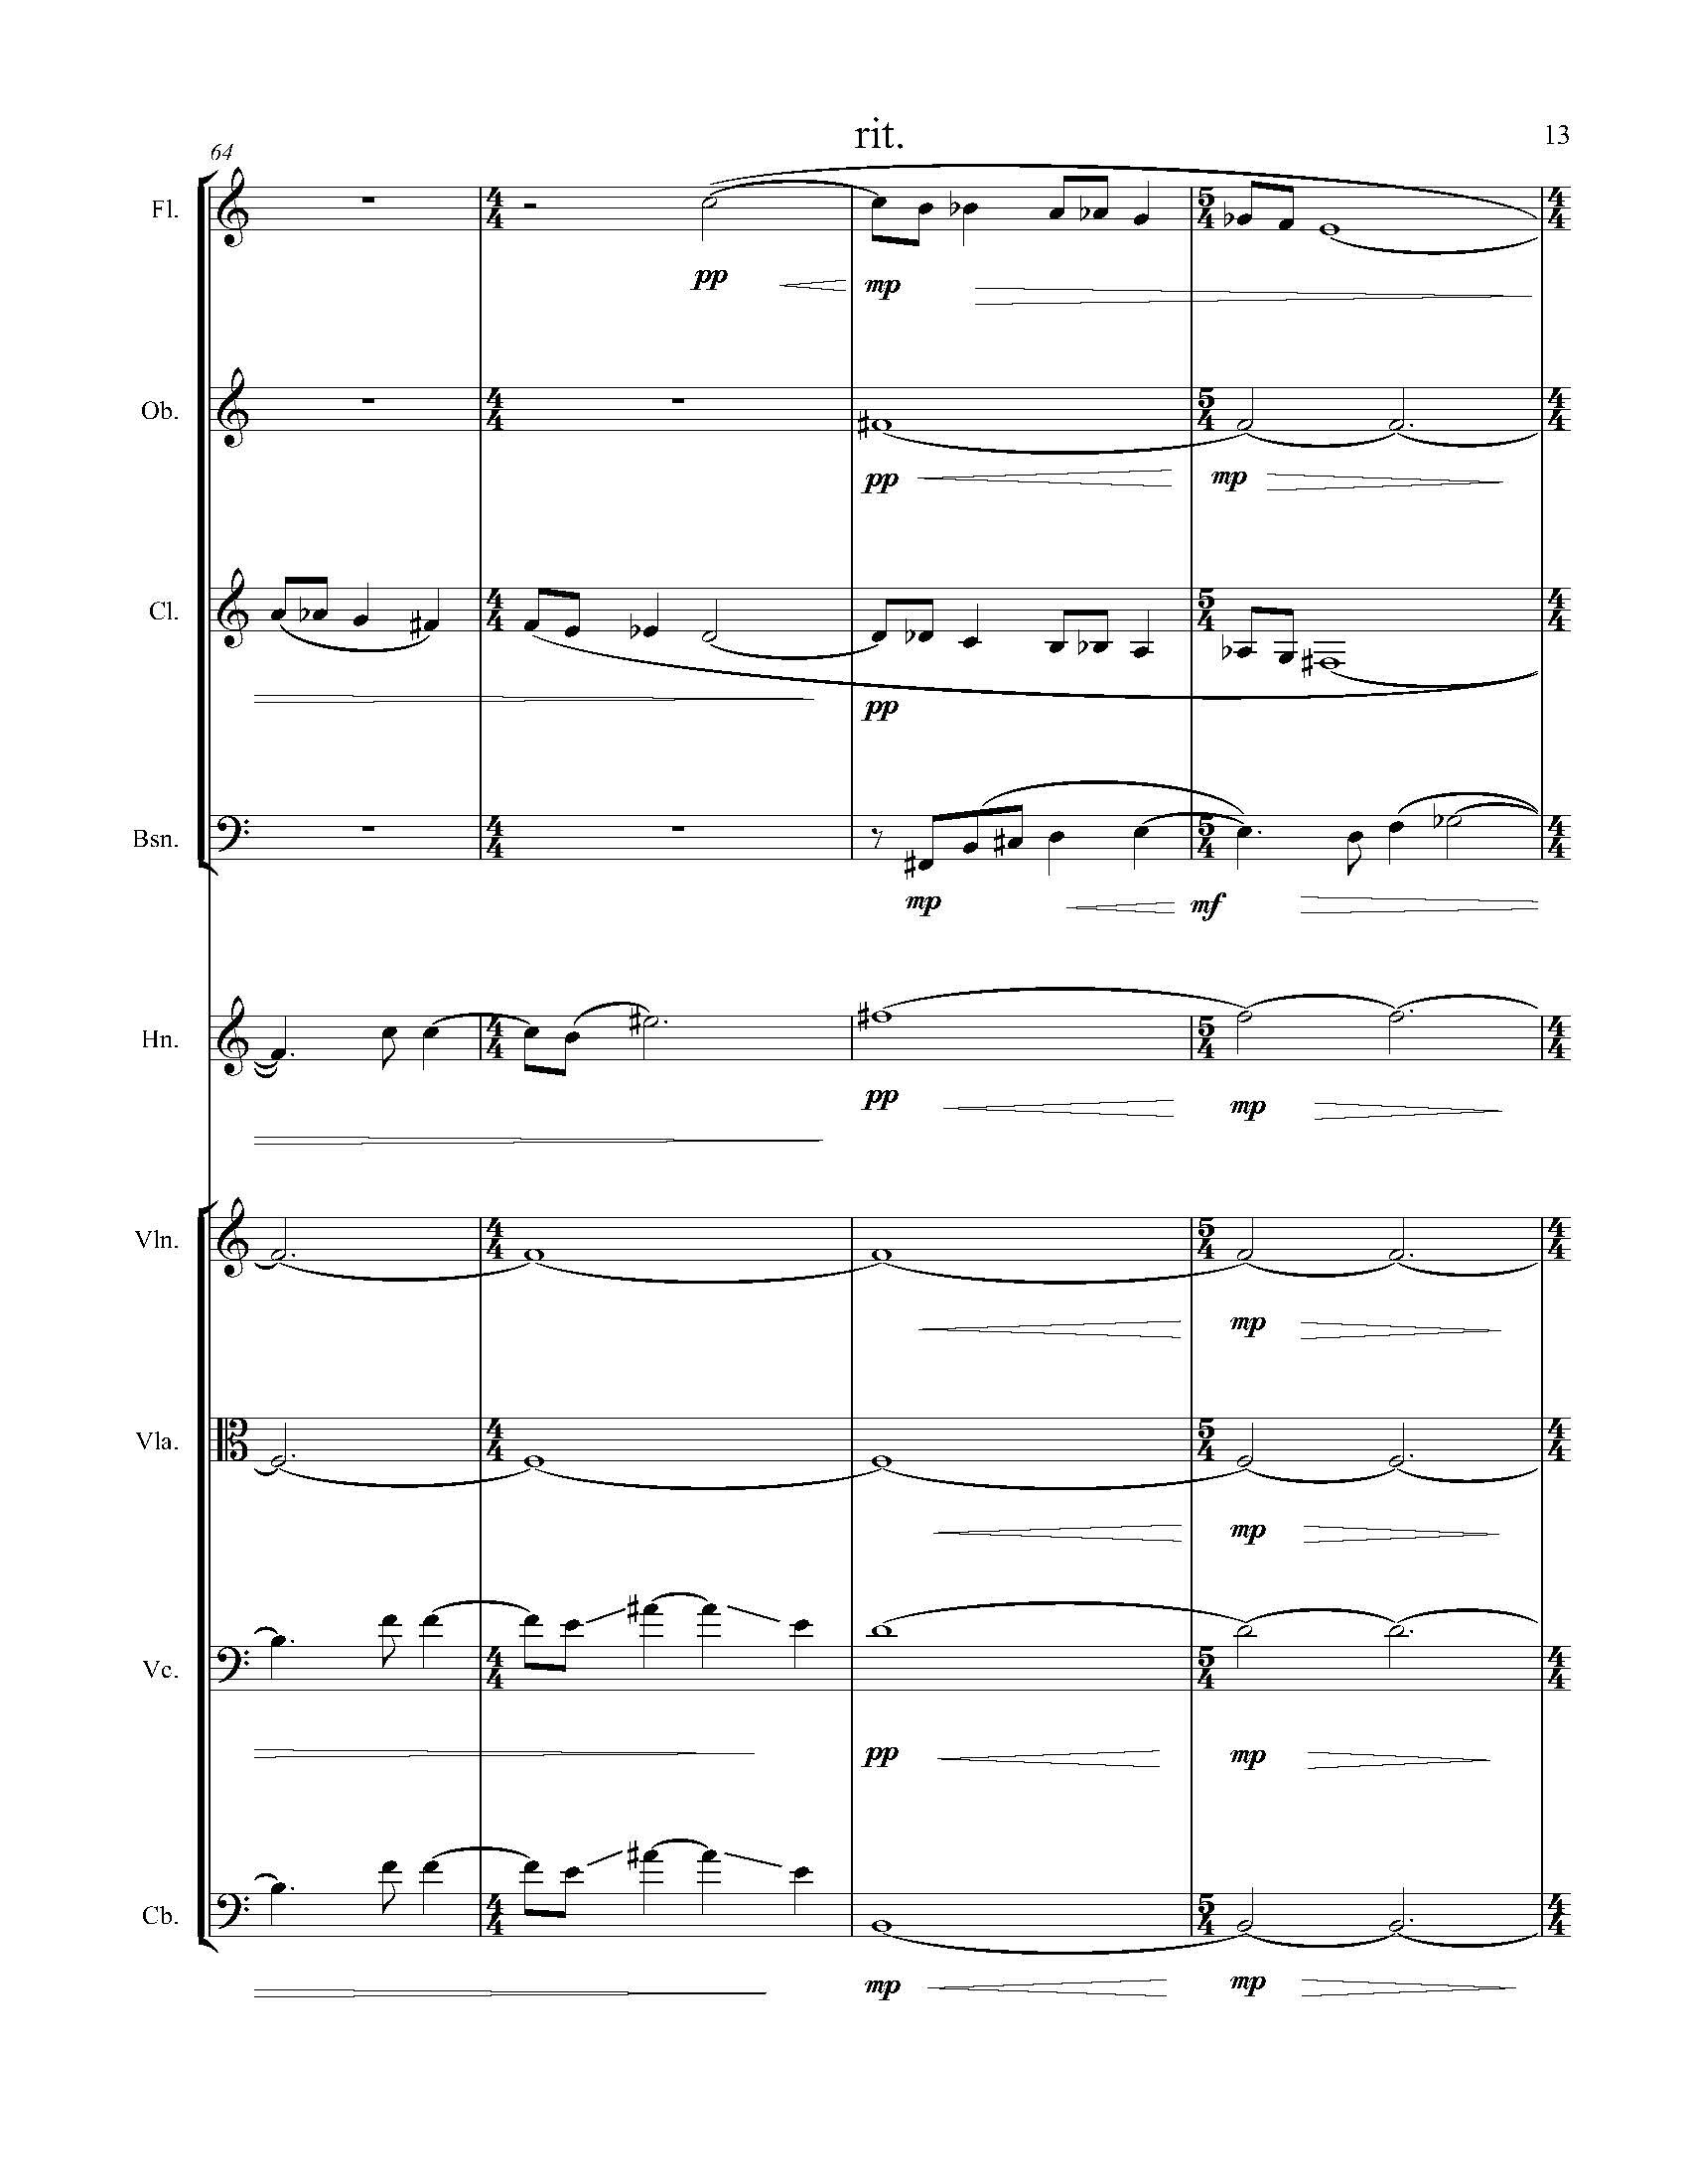 In Search of a Bird - Complete Score_Page_19.jpg